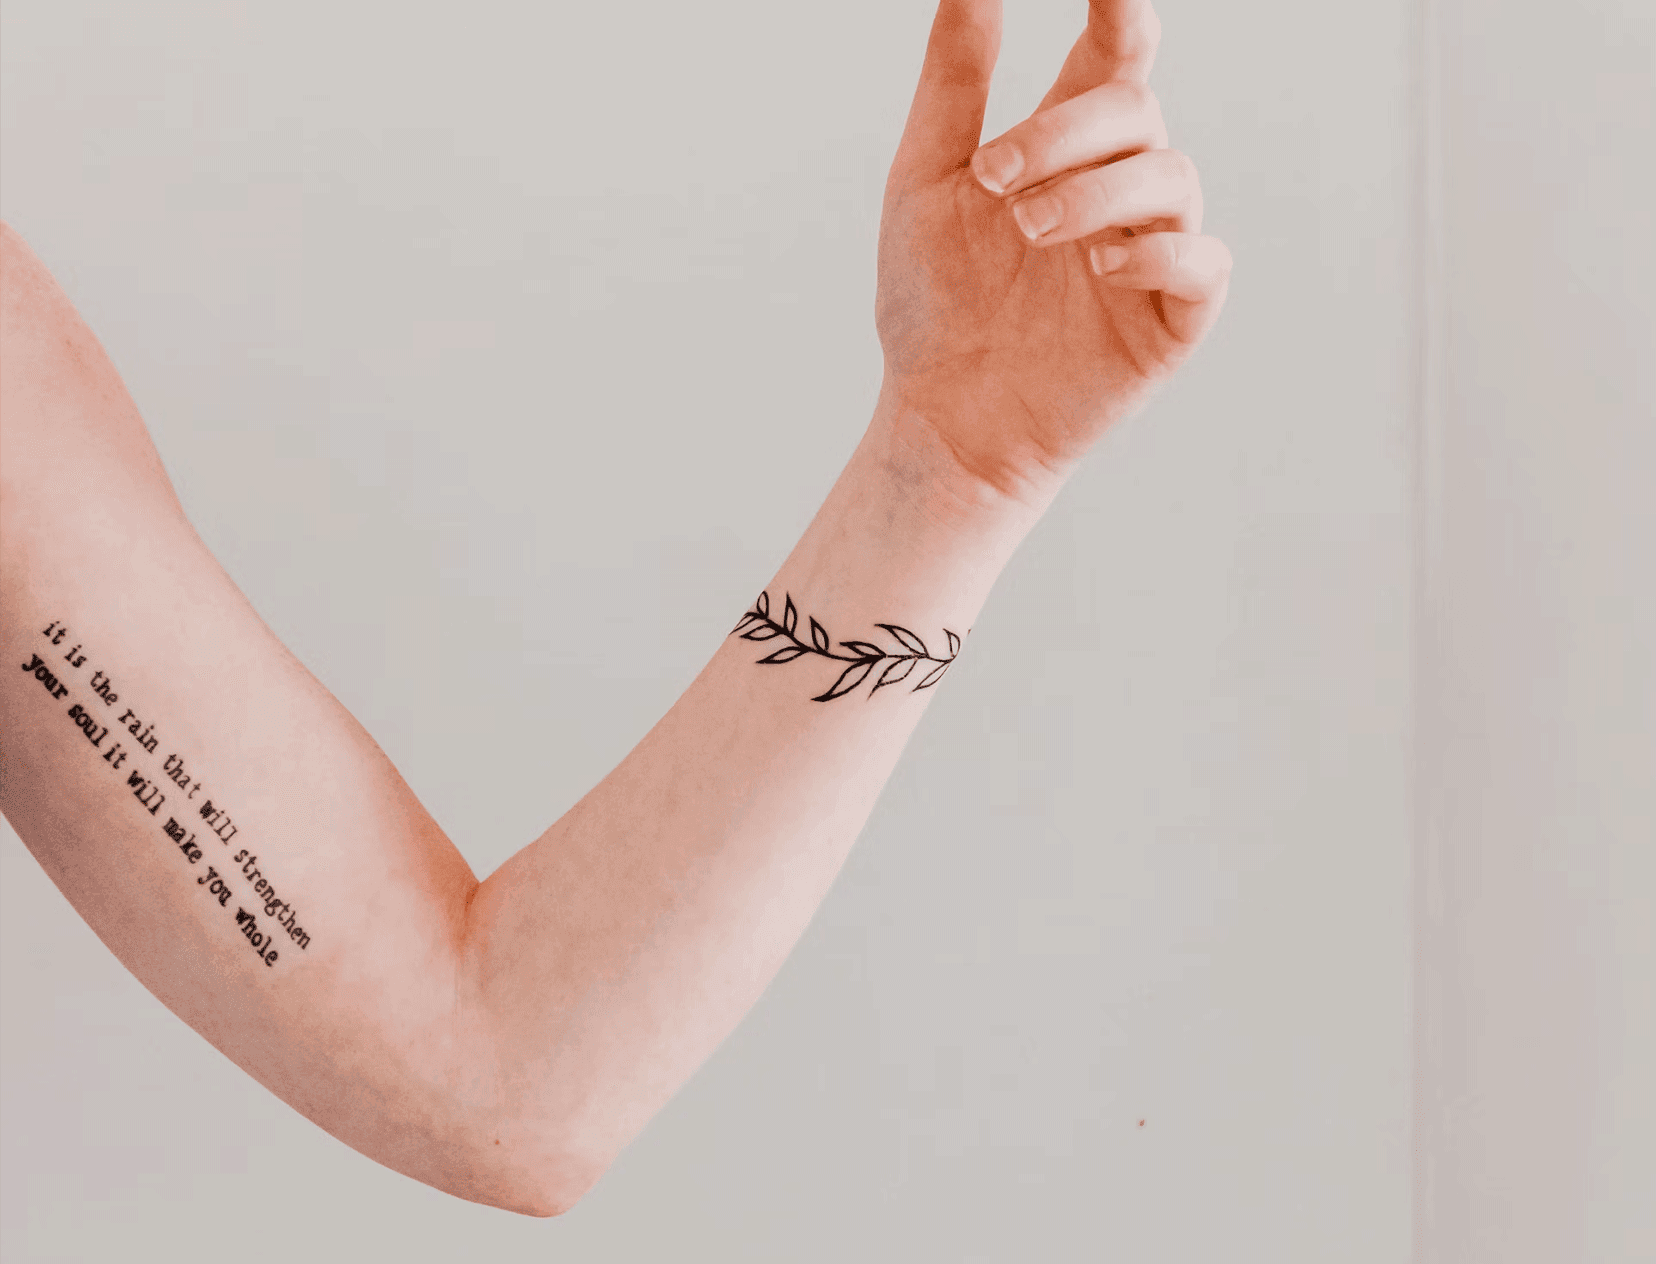 10 Minimalistic Tattoo Ideas For Women Who Love Small &amp; Subtle Things In Life